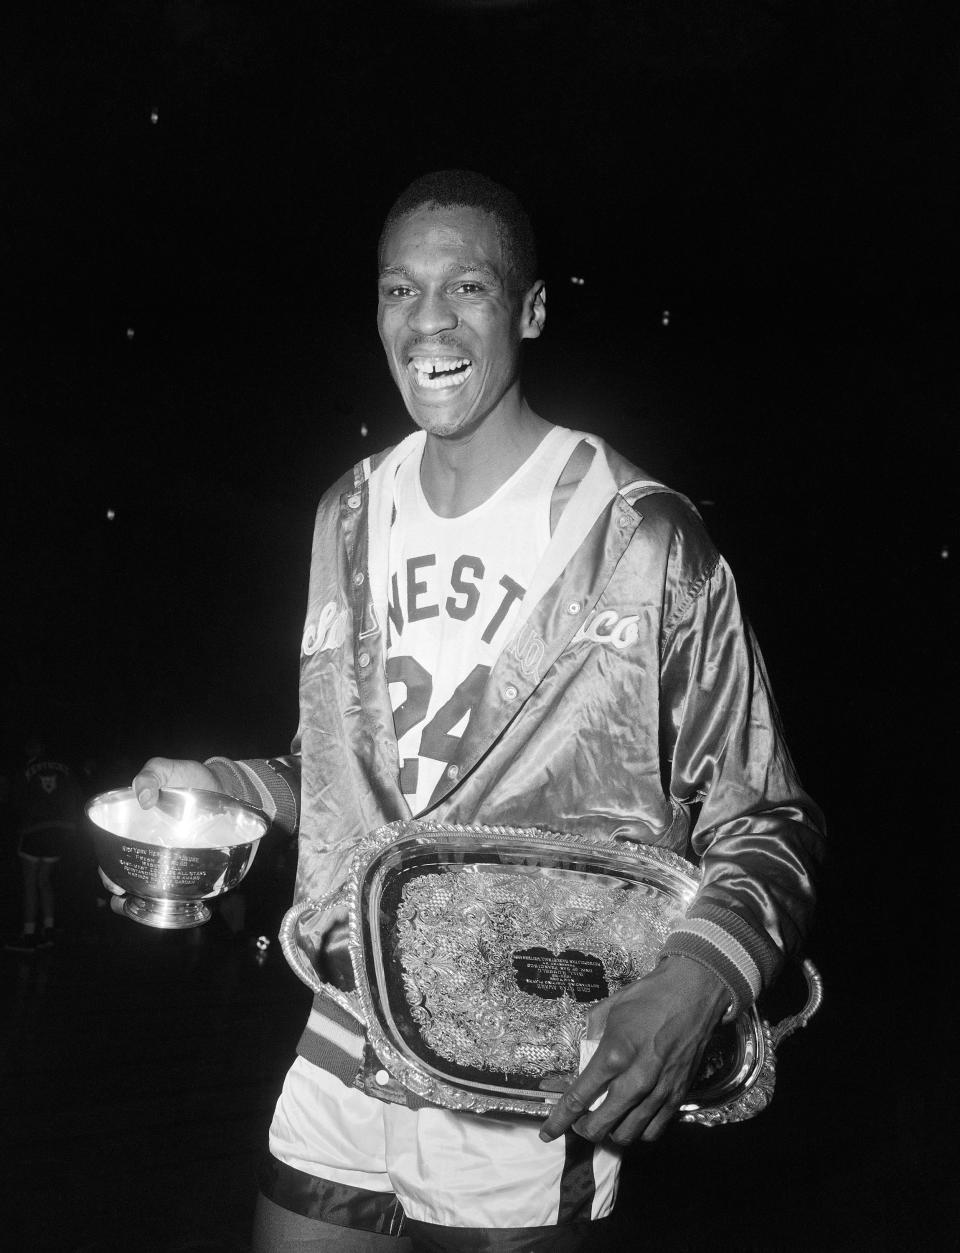 FILE - San Francisco NCAA college basketball player Bill Russell holds his Most Valuable Player trophies at Madison Square Garden in New York, March 31, 1956. The 6-foot-10 center had one of most dominating NCAA Tournament games in history during the 1956 title game, finishing with 26 points and 27 rebounds in a win over Iowa. He also was believed to have swatted at least a dozen shots, though blocked shots were not yet an official stat.(AP Photo/John Lent, File)